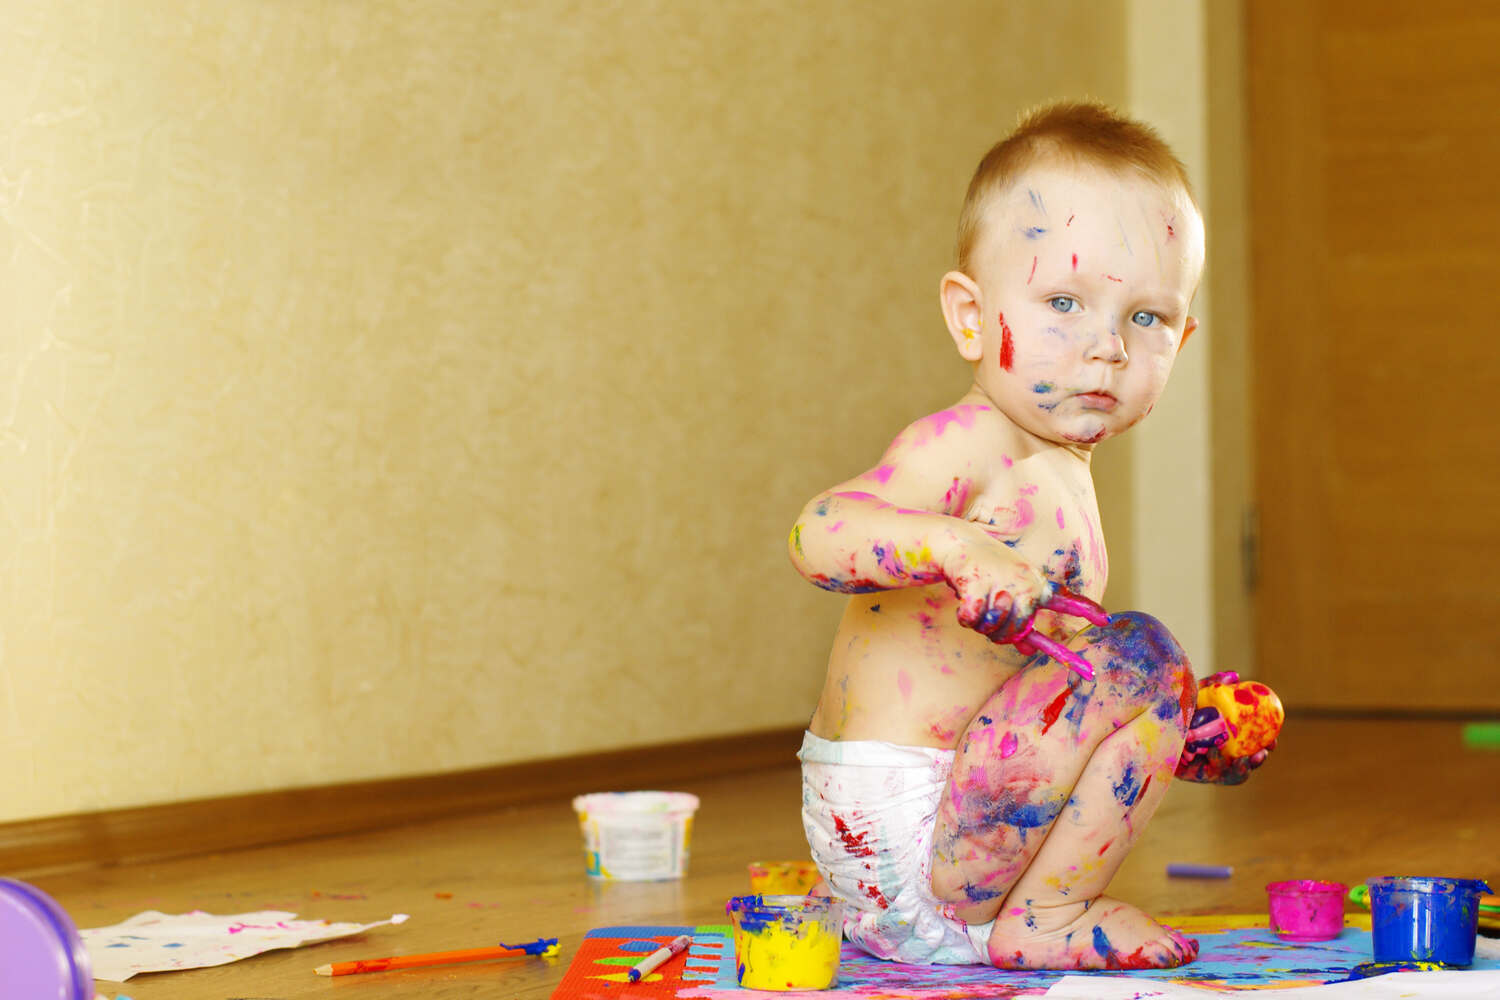 Let your kid get messy